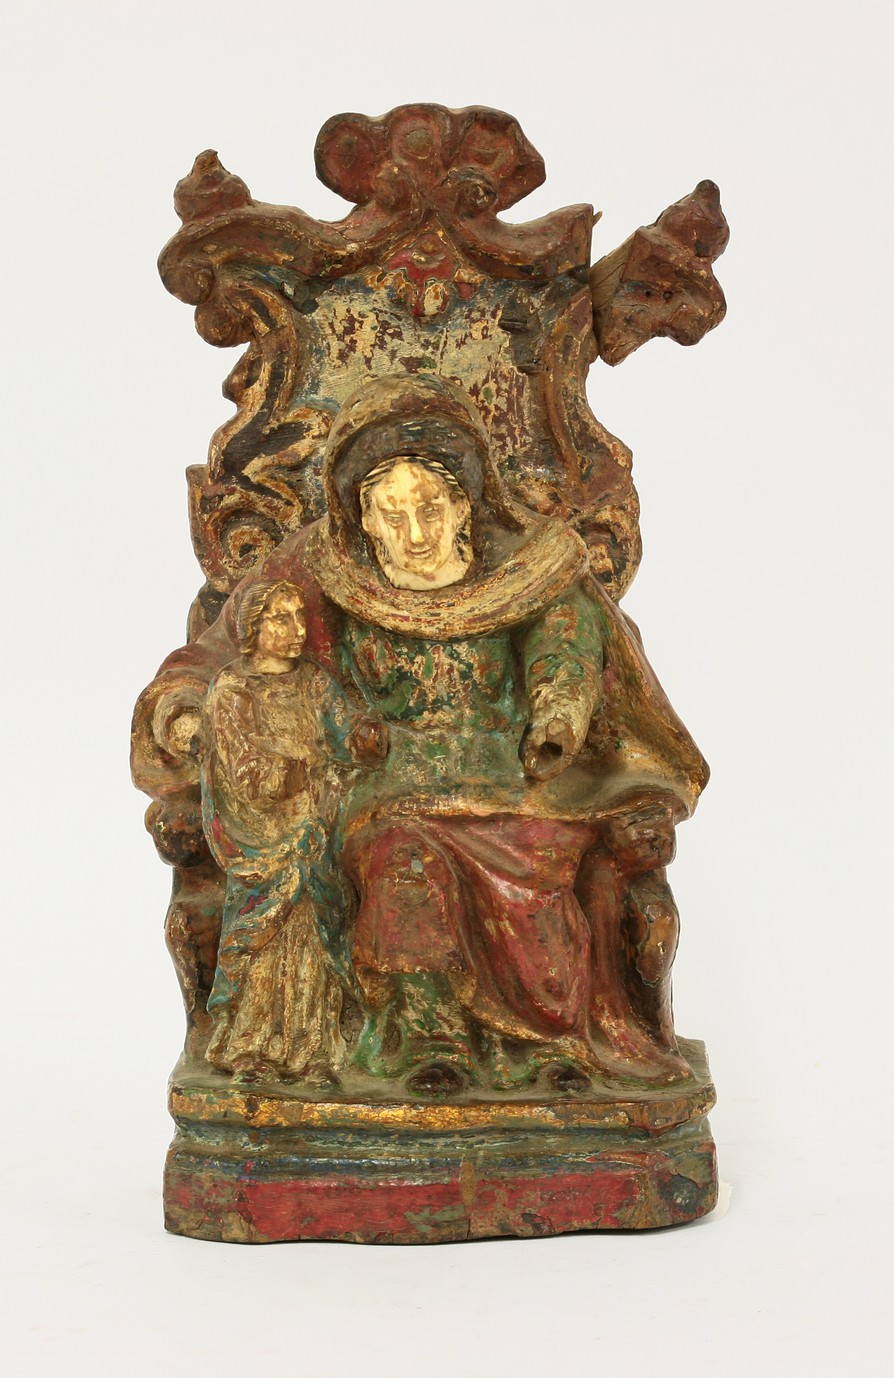 A Spanish polychrome carving,
17th century, probably depicting Mary and Jesus, she sitting in a